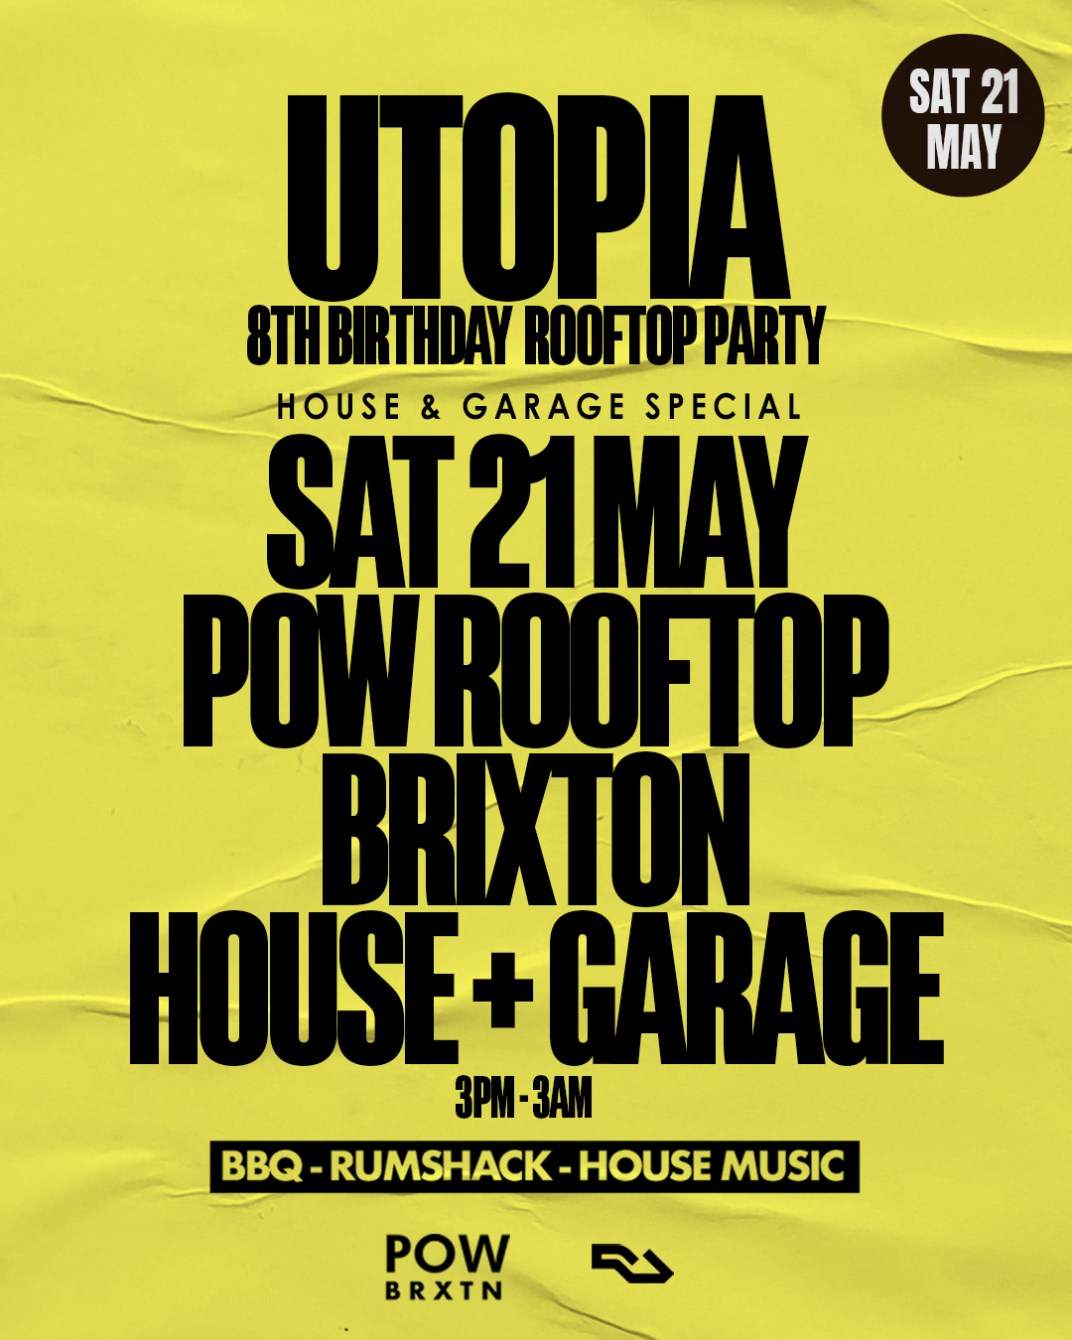 UTOPIA 8th Birthday Rooftop Day Party House and Garage Special - Página trasera